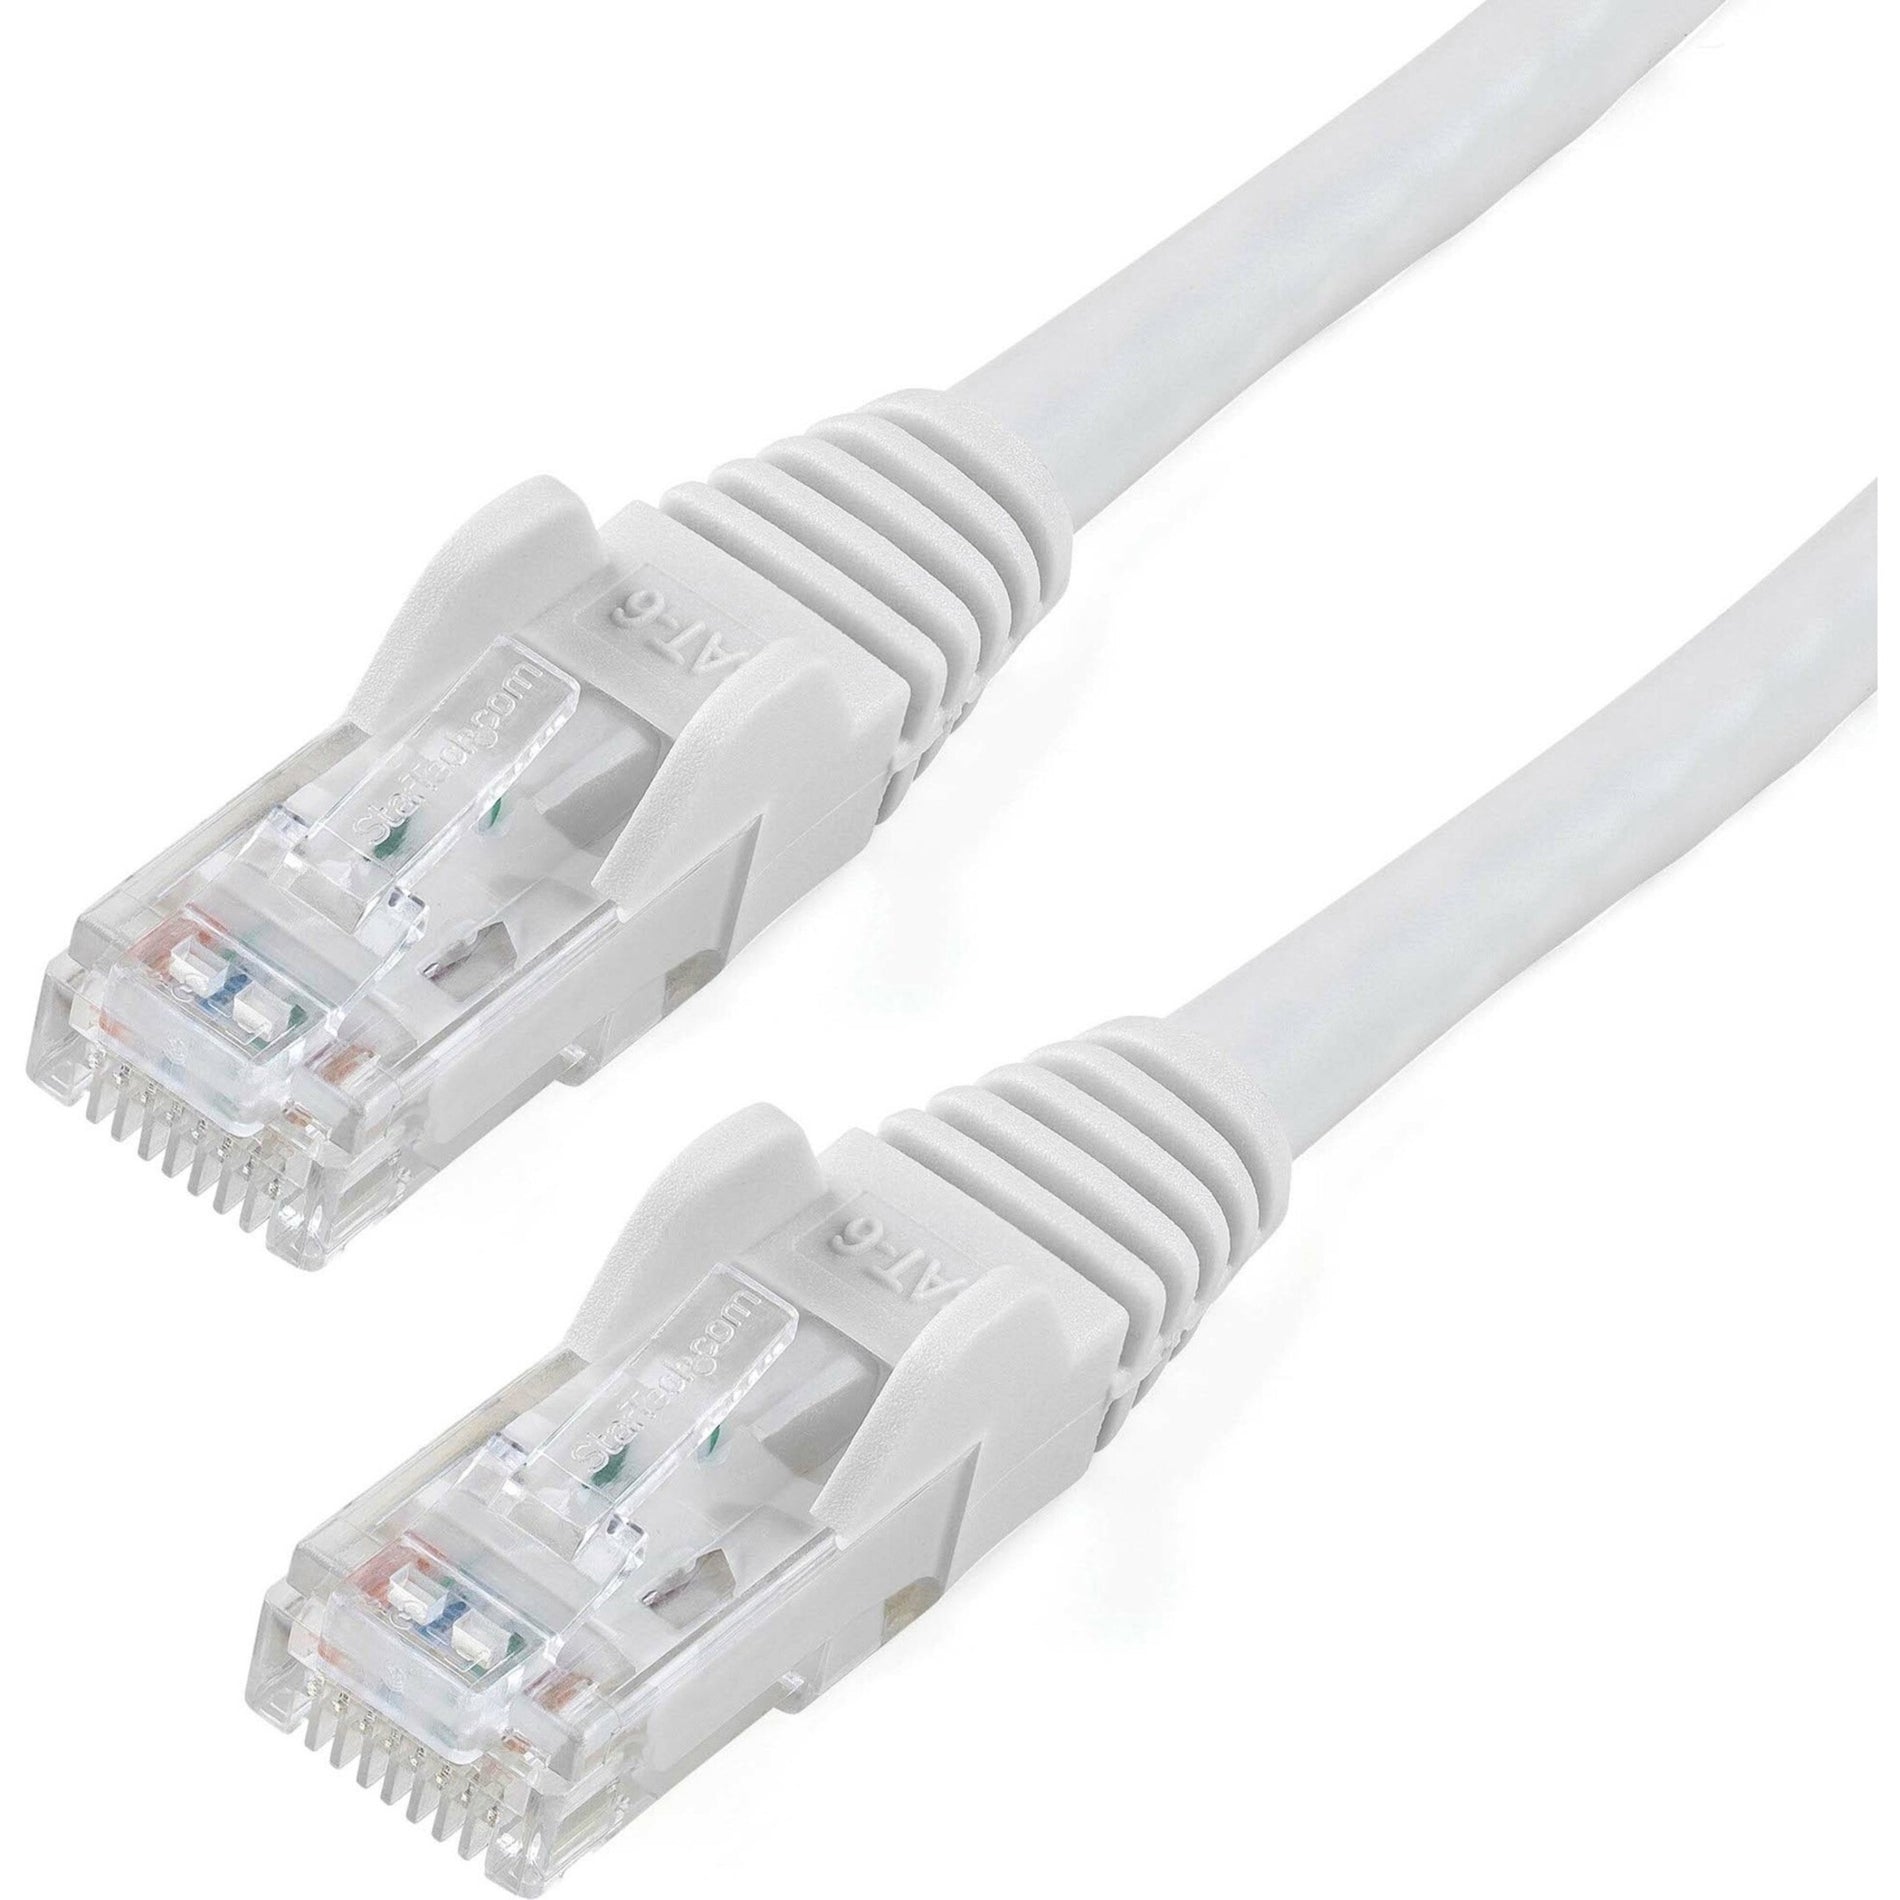 StarTech.com N6PATCH12WH Cat6 Patch Cable, 12ft White Ethernet Cable, Snagless RJ45 Connectors